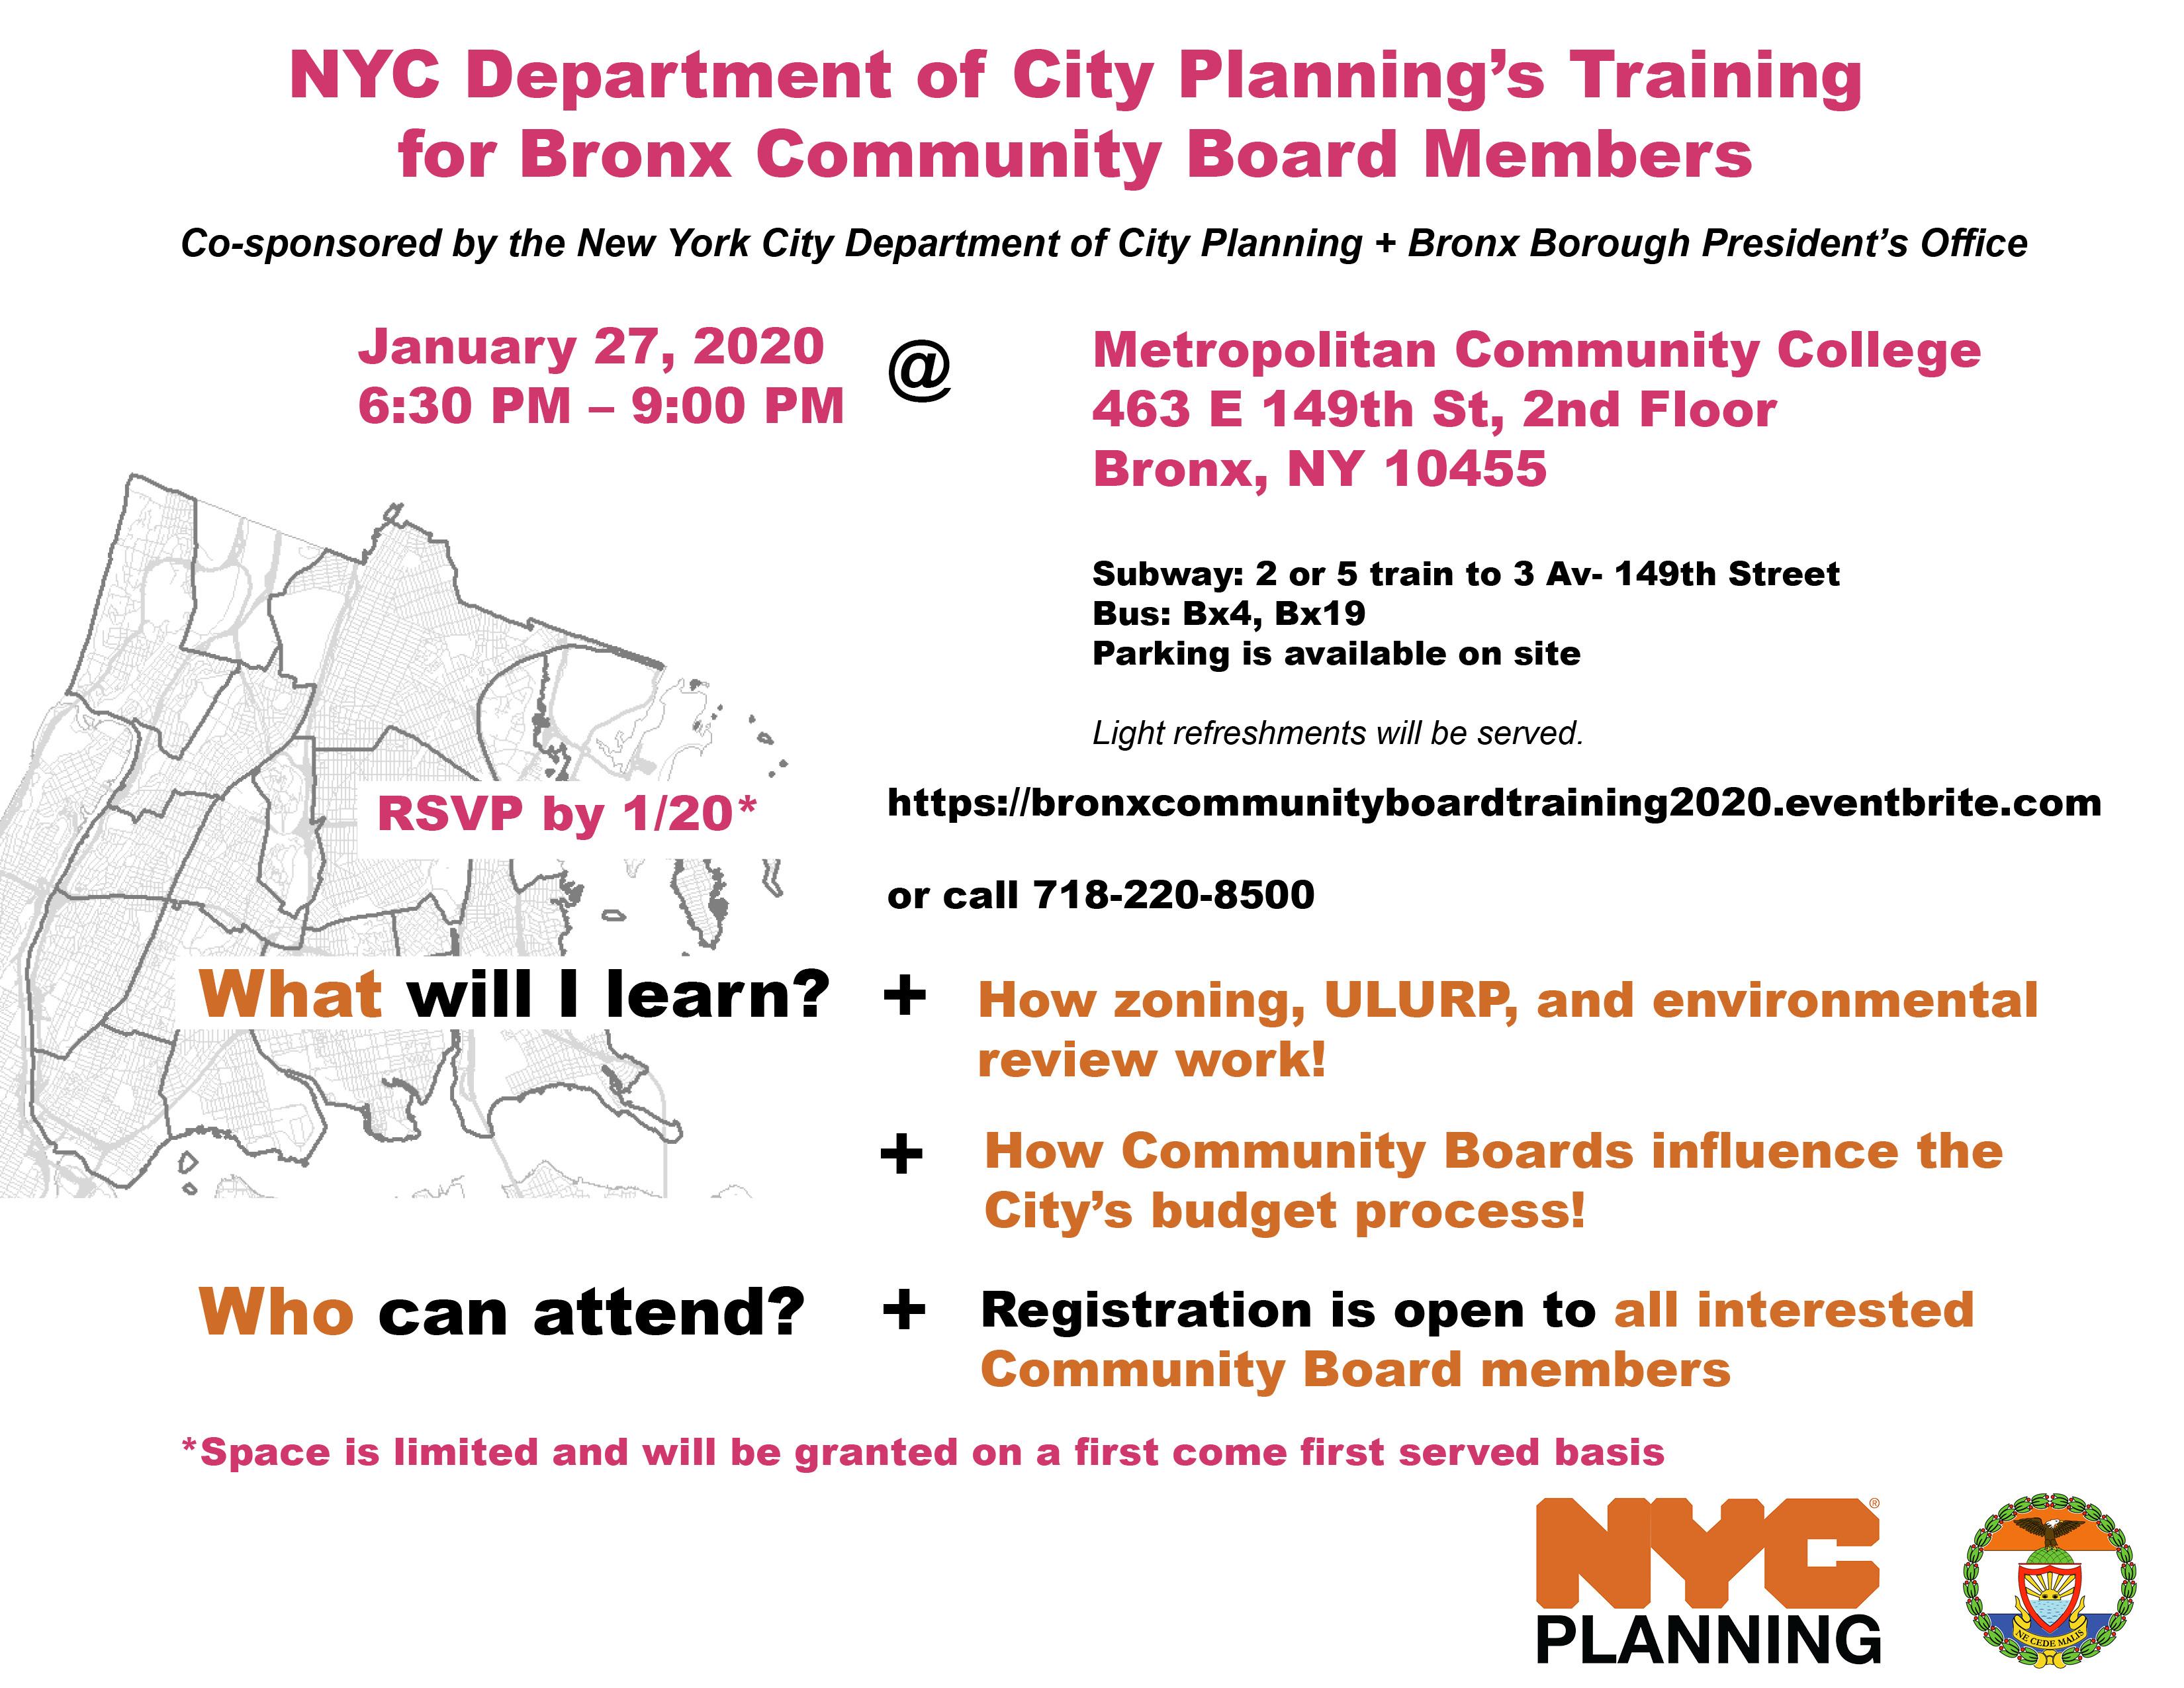 Department of City Planning's Training for Community Board Members, 2020